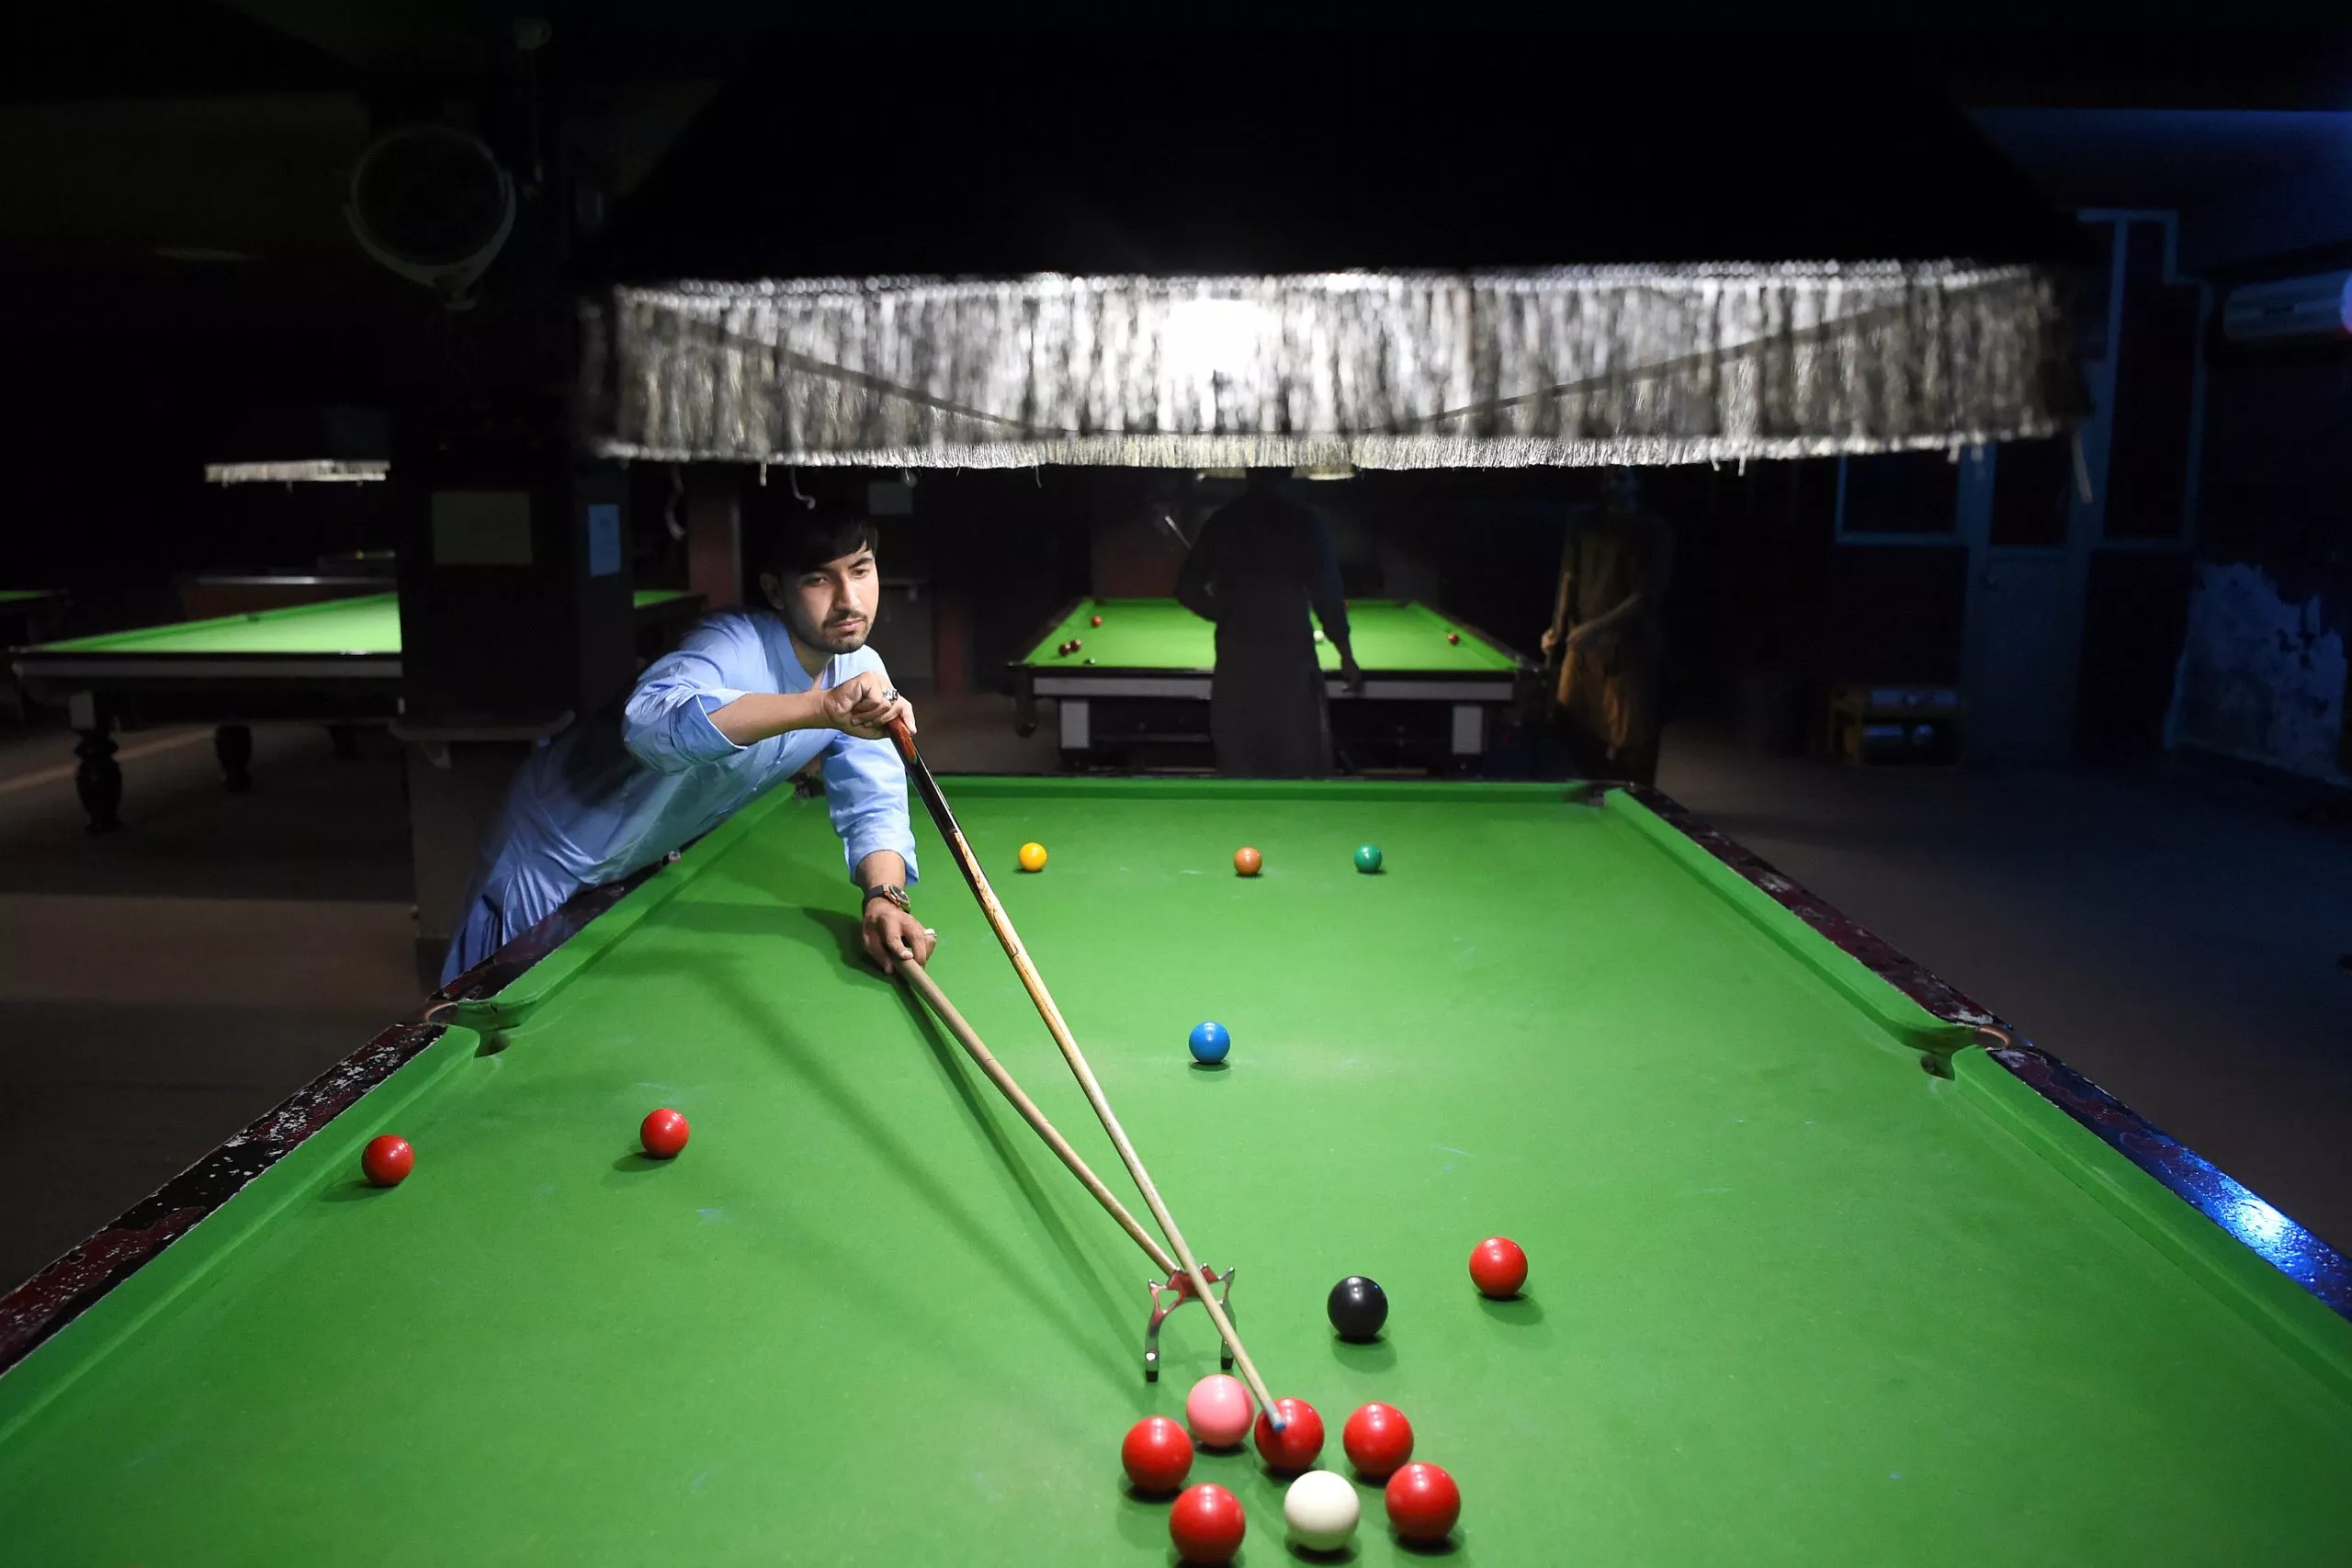 Arena Billiards & Cafe in Turkey, Central Asia | Cafes,Billiards - Rated 3.7